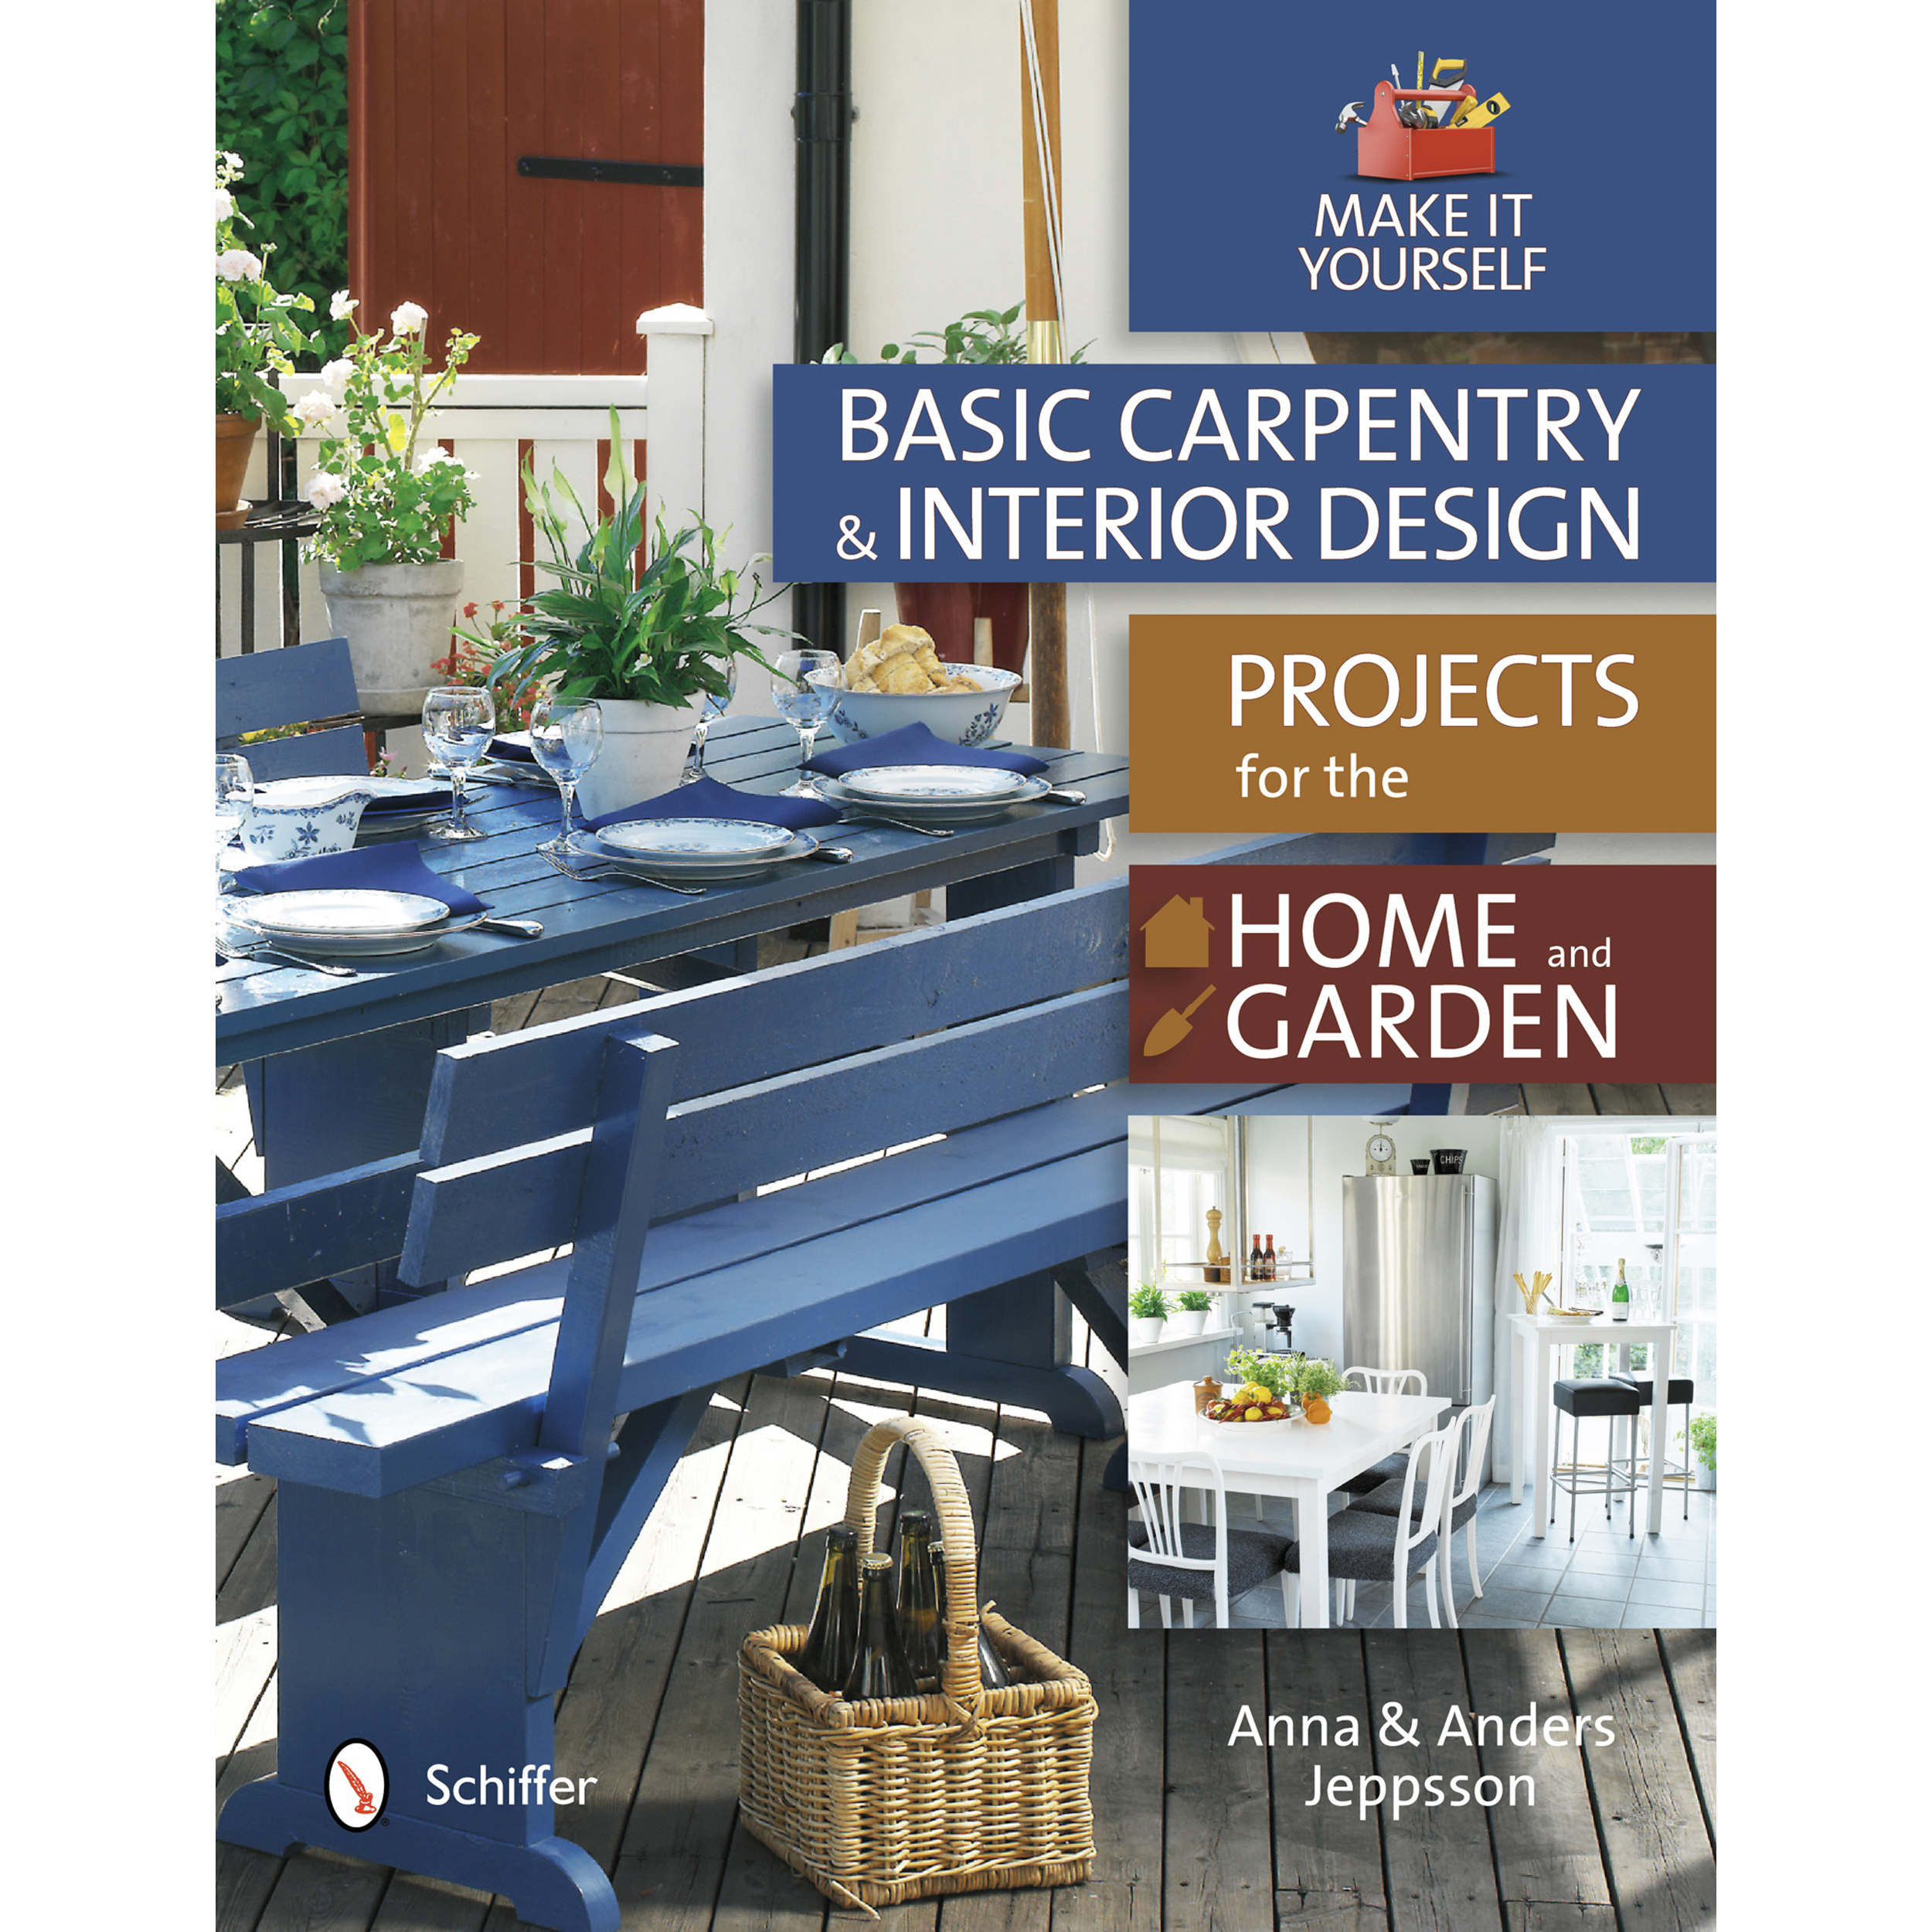 Basic Carpentry And Interior Design Projects For The Home And Garden: Make It Yourself